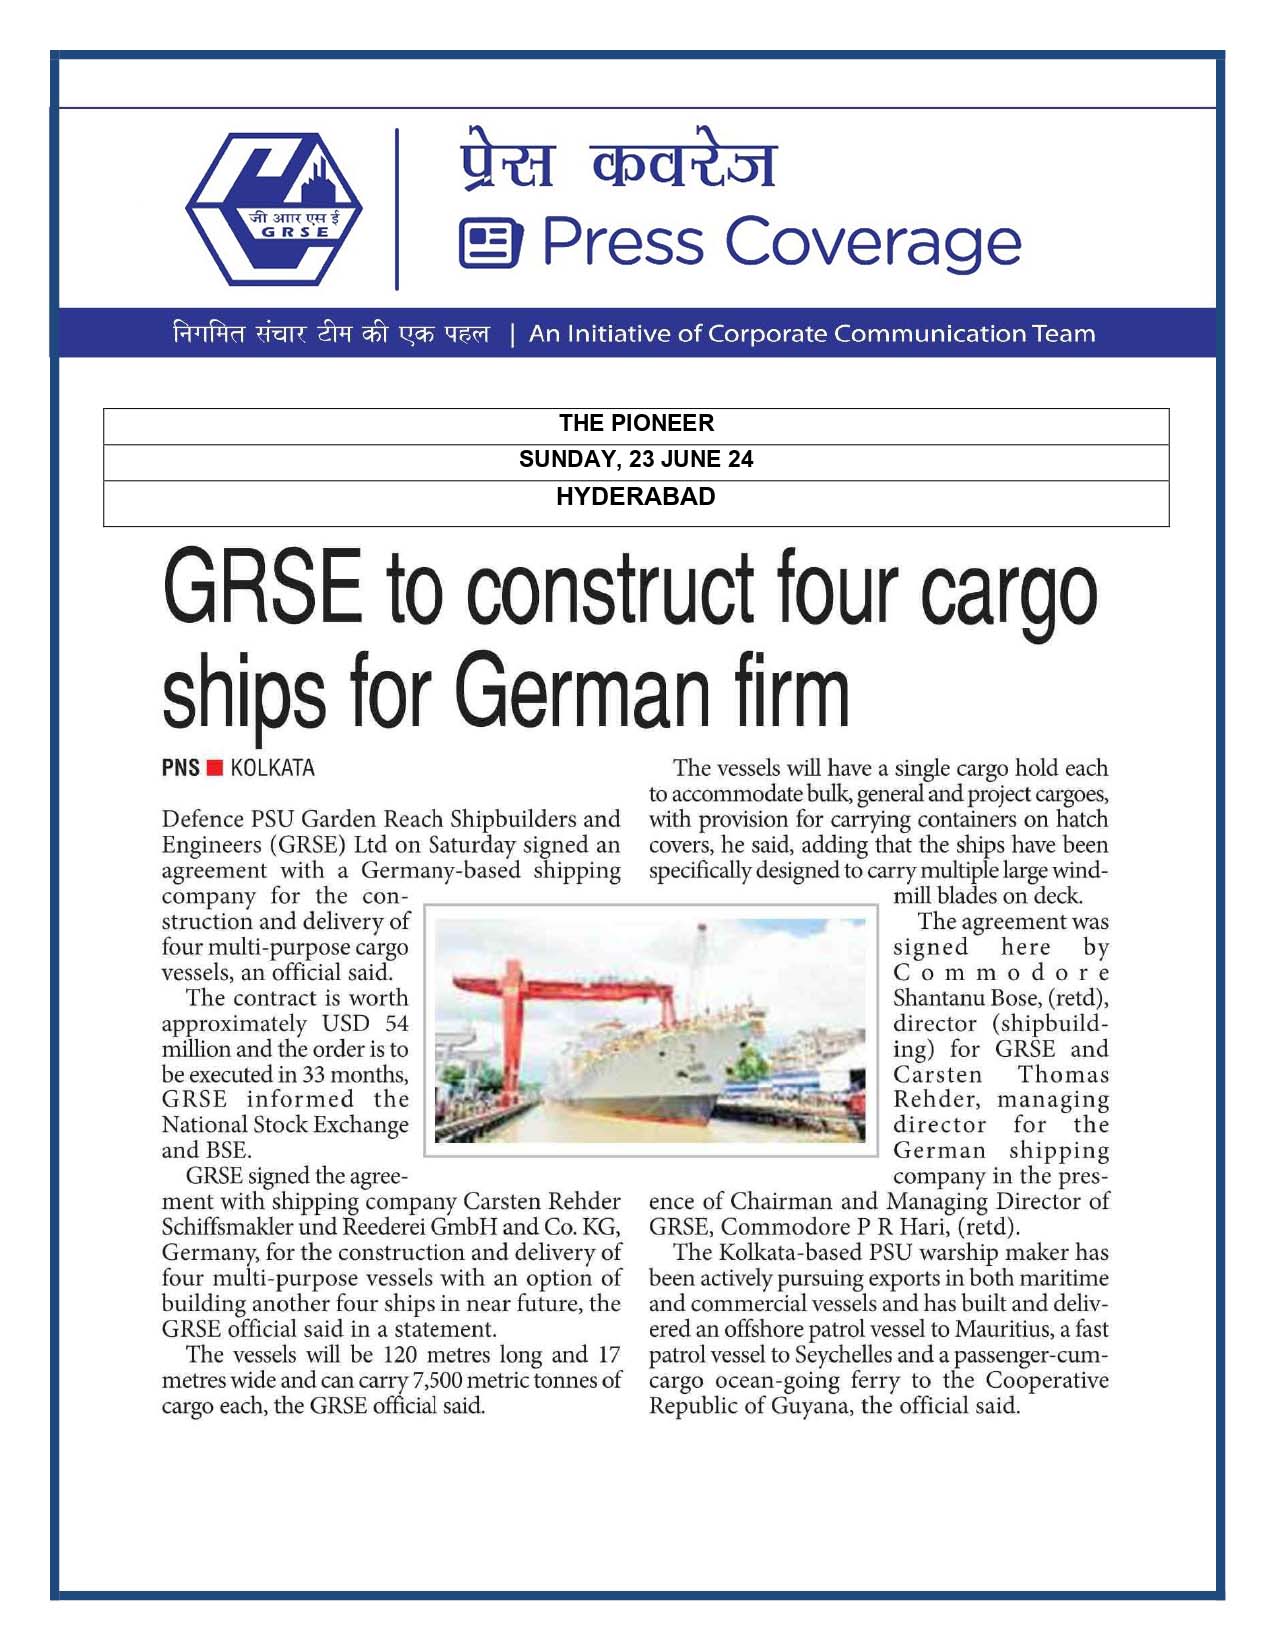 Press Coverage : The Pioneer, 23 Jun 24 : GRSE to construct four cargo ships for German firm